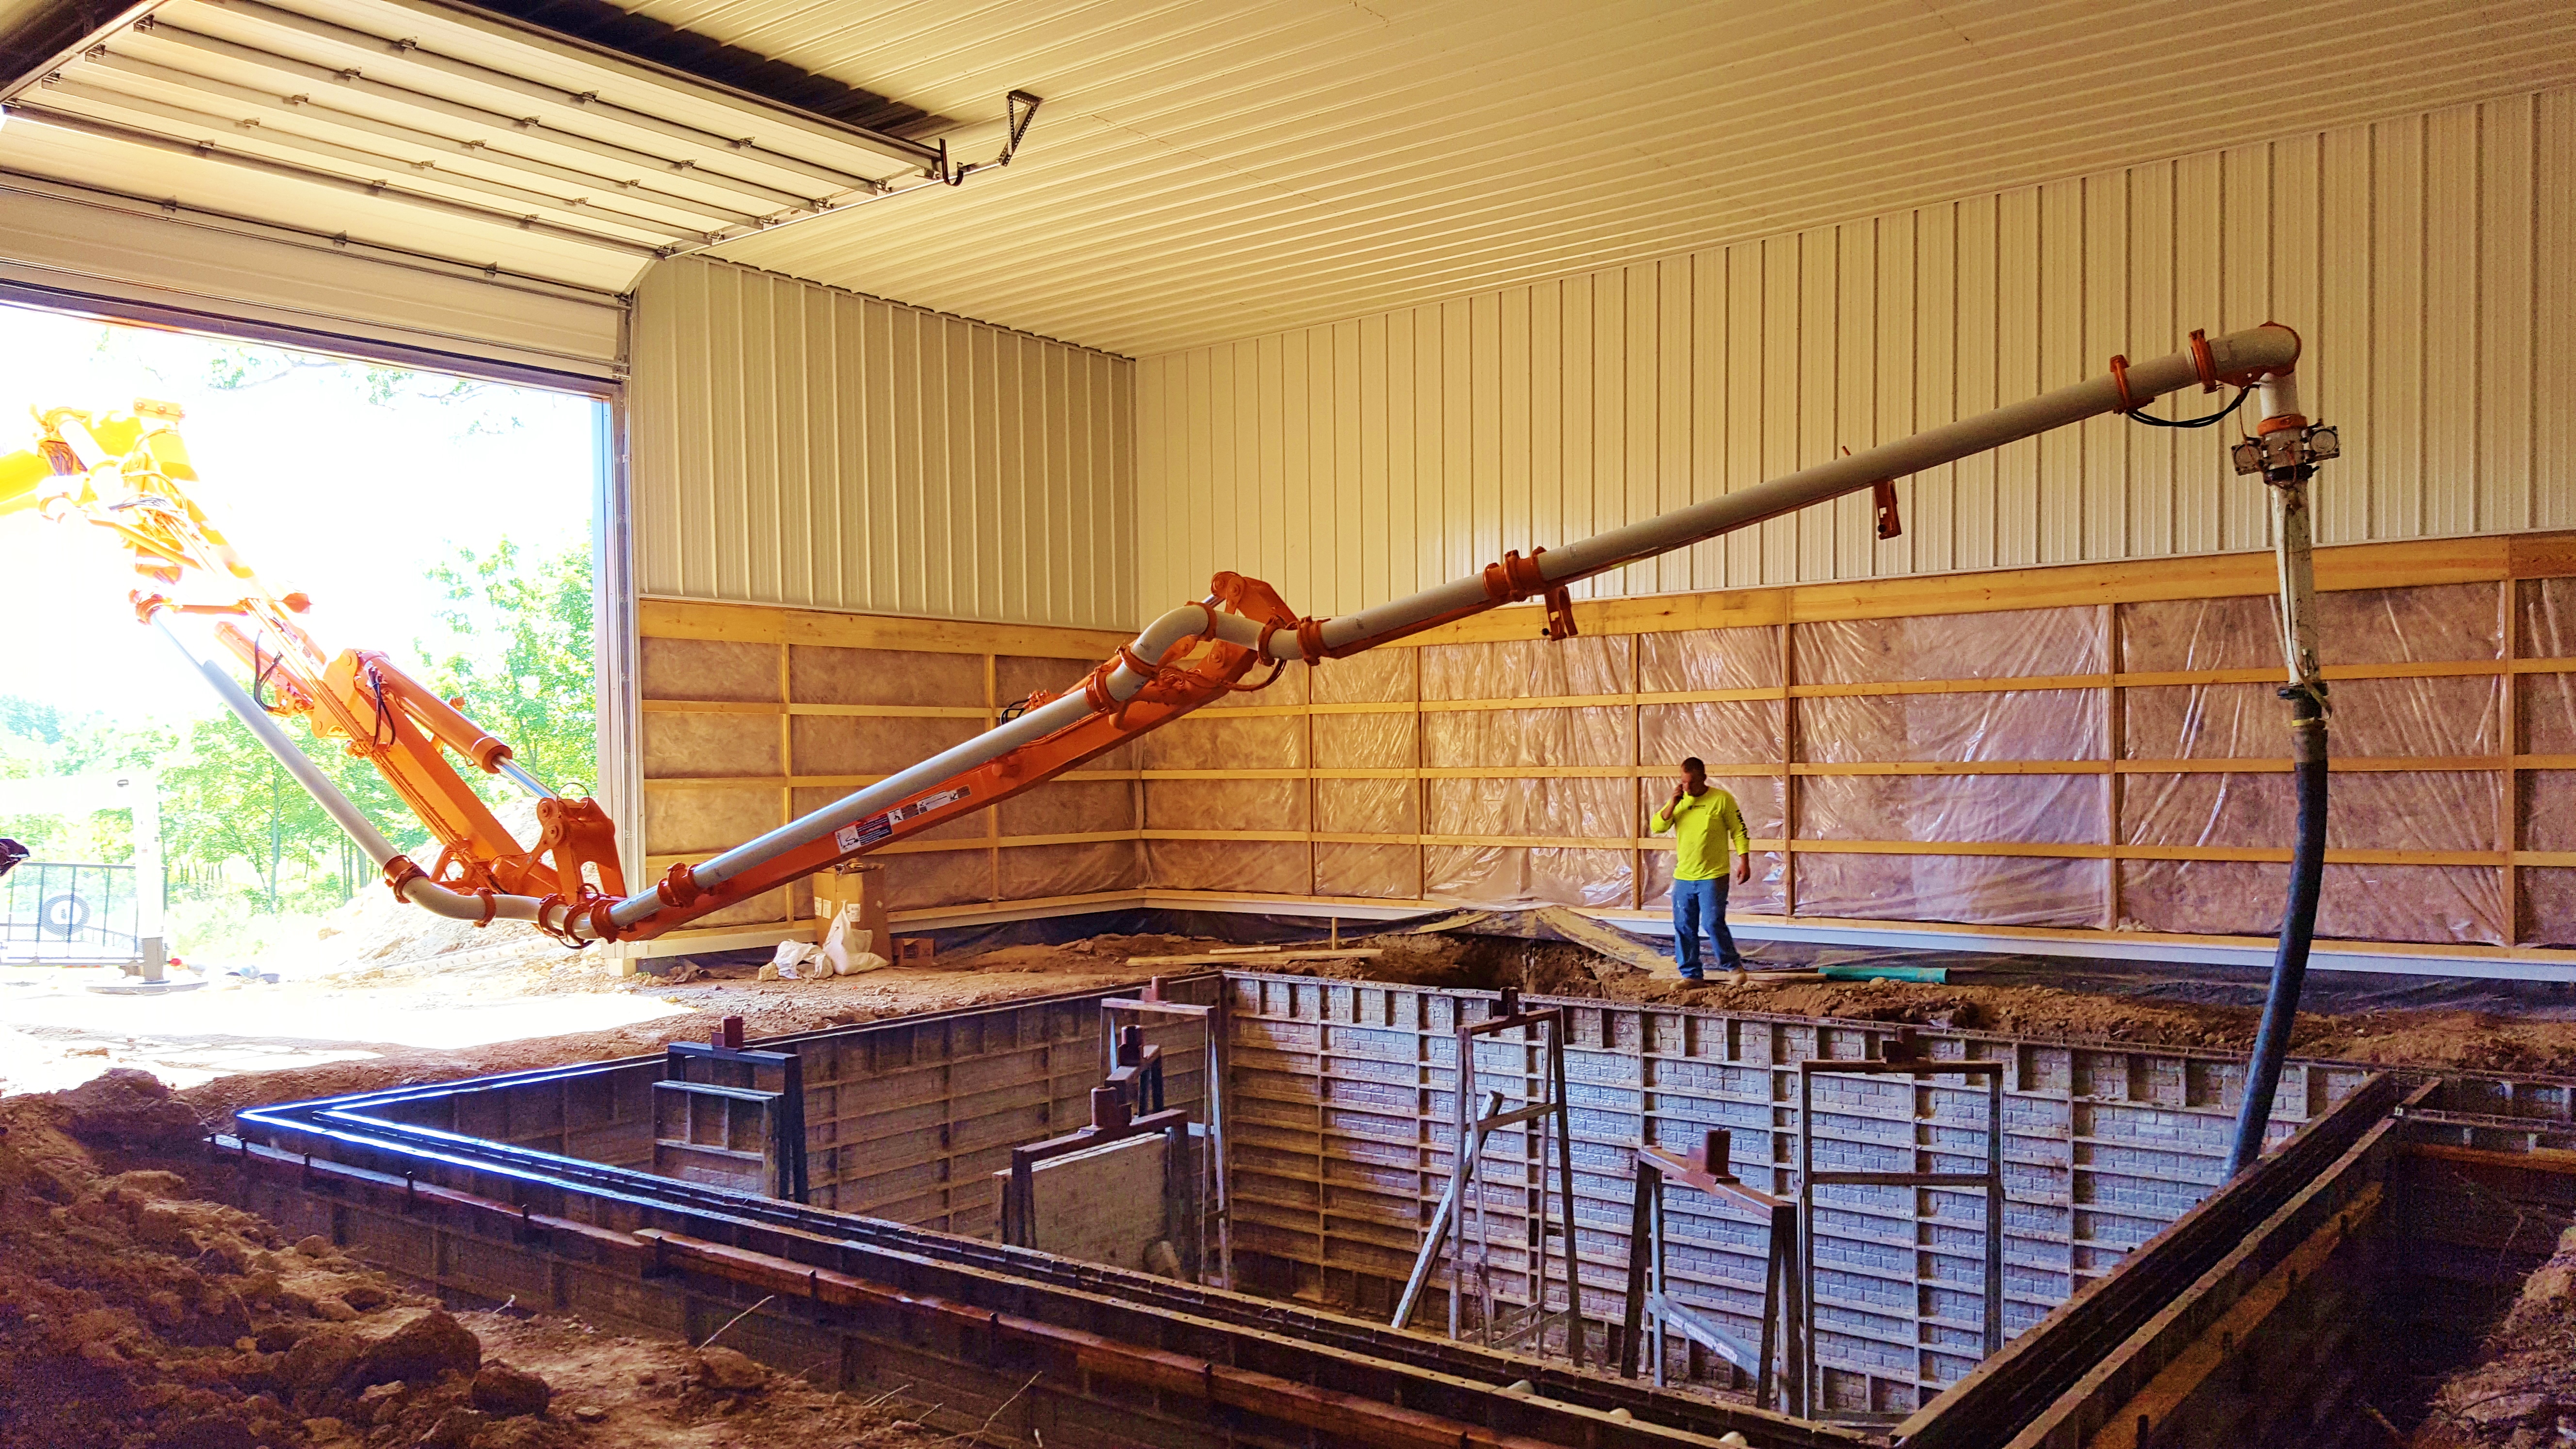 Custom Concrete Pumping helps build the concrete walls in a residential bunker with the 31 meter truck.